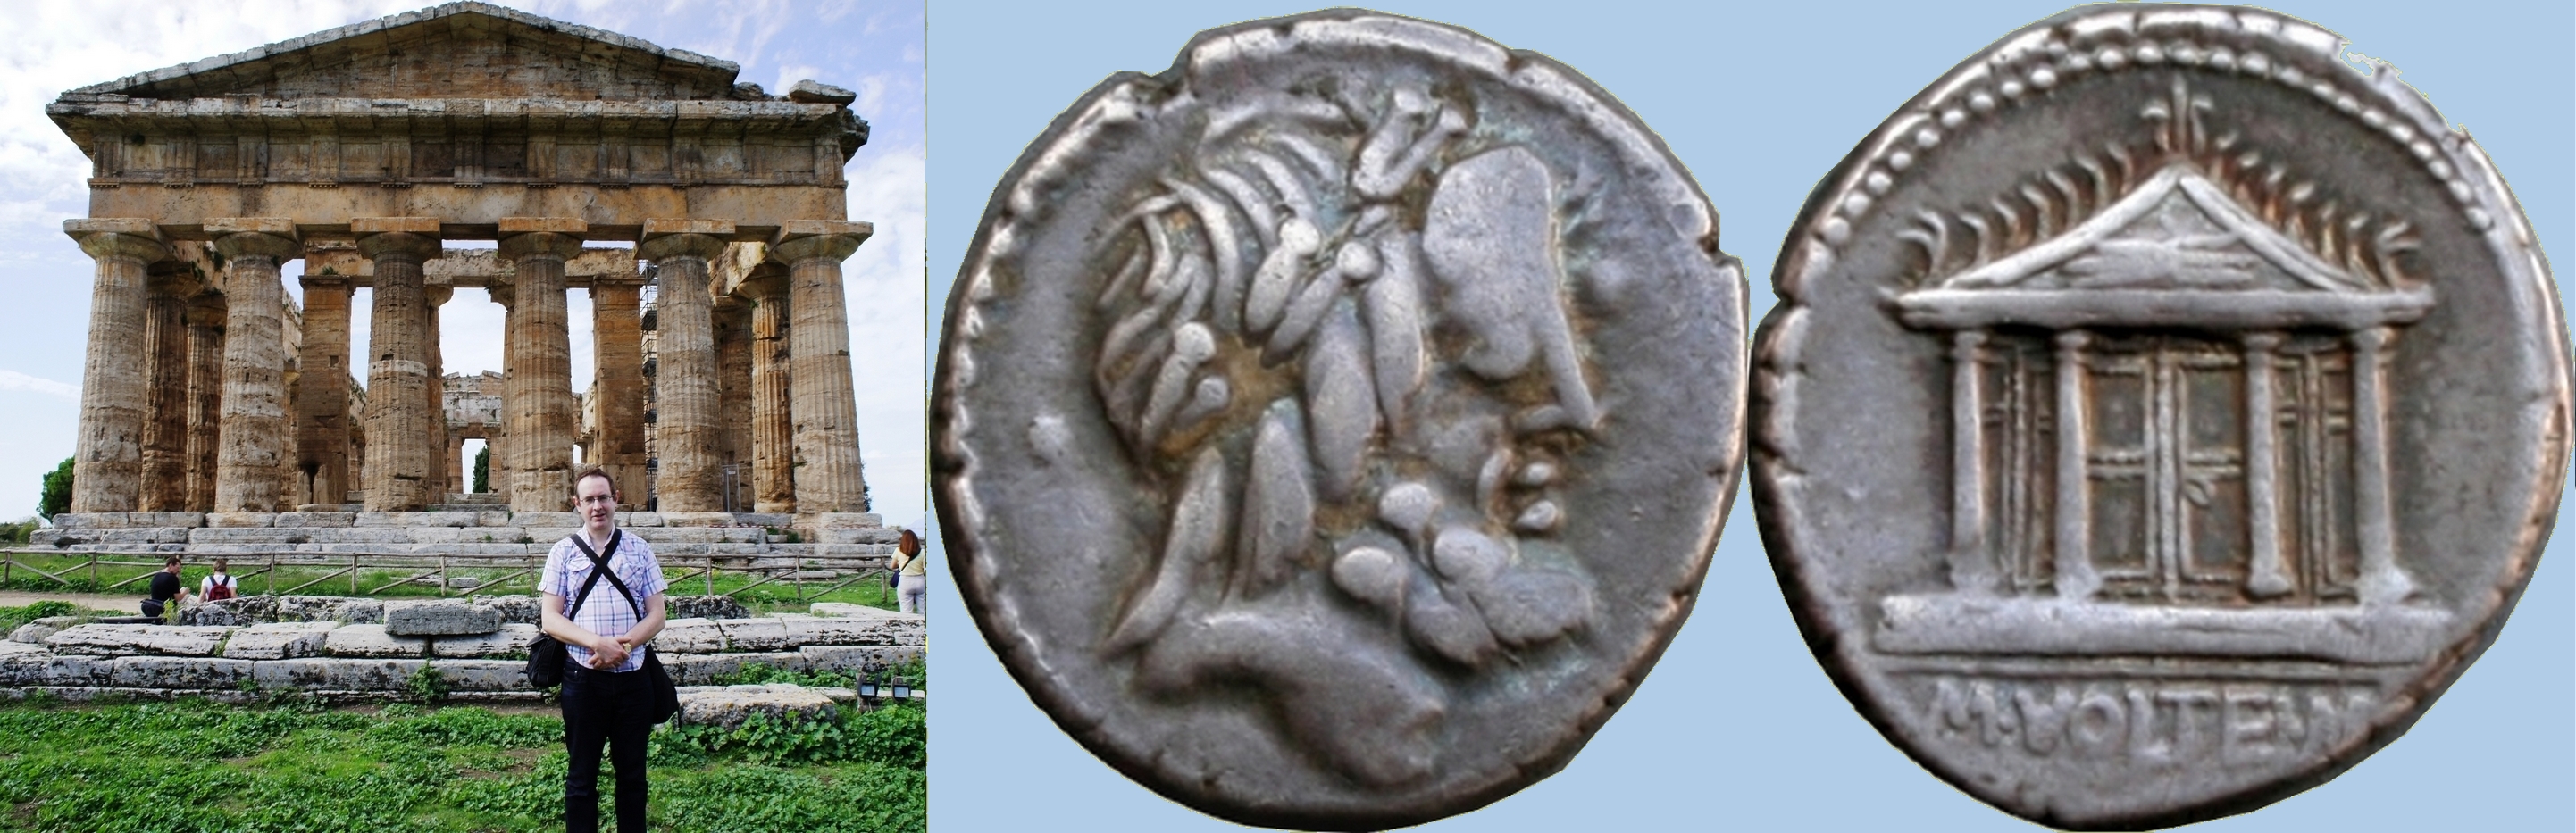 385/1 coin of Marcus Volteius with Temple of Jupiter Capitolinus alongside Paestum's Temple of Hera II 450BC